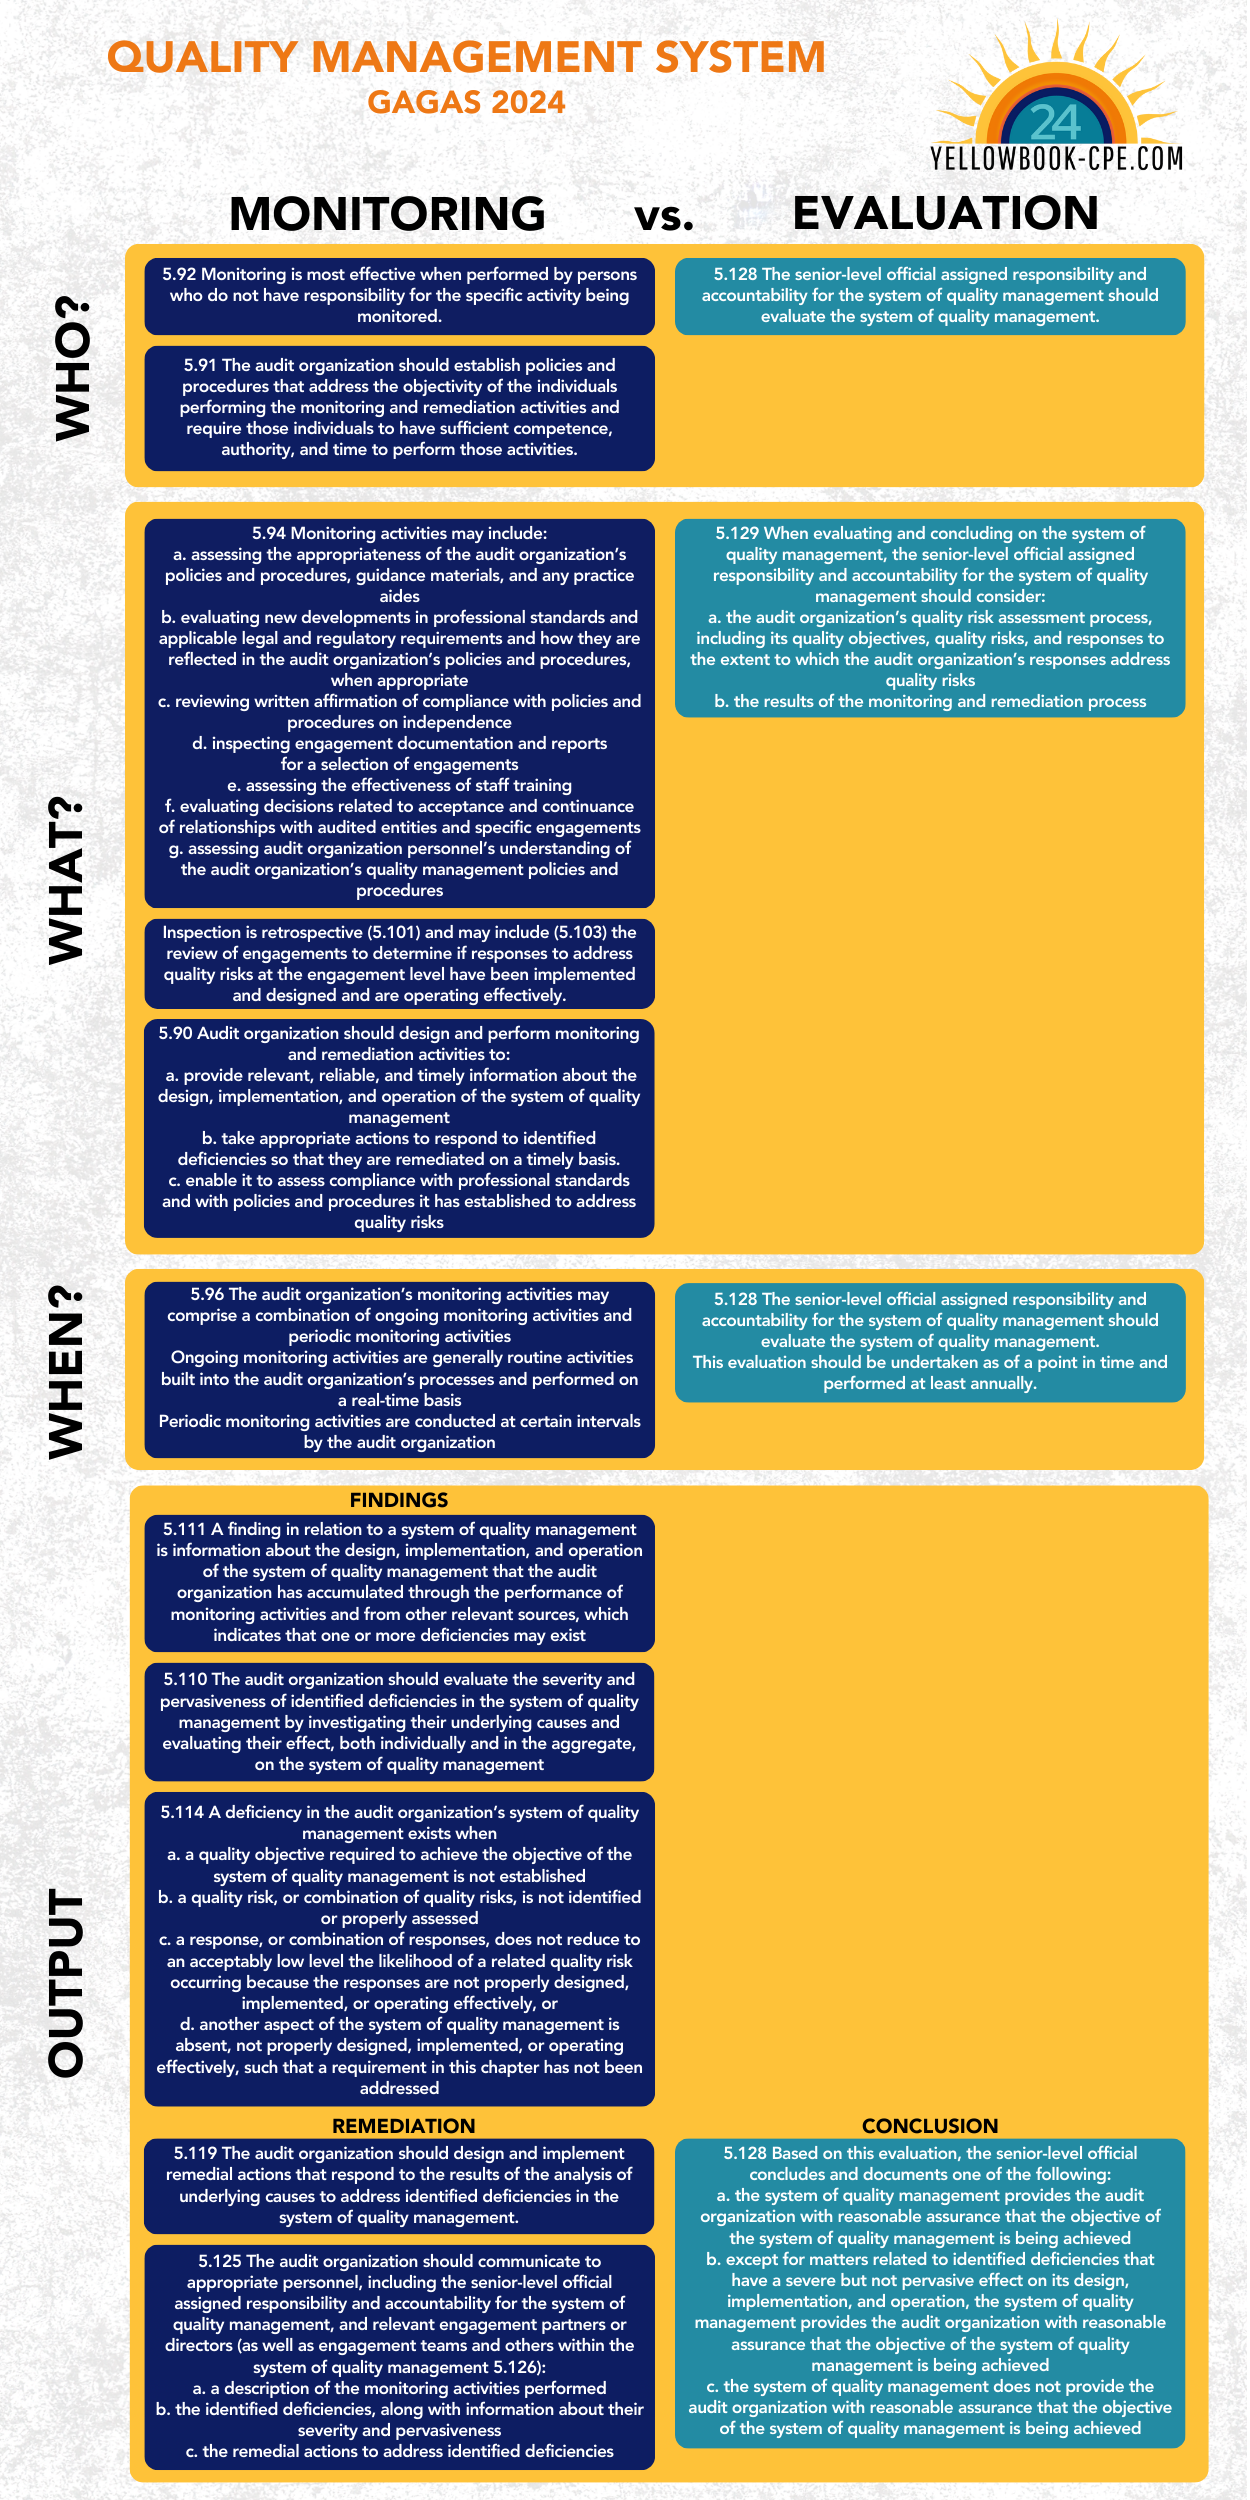 Monitoring vs. Evaluation GAGAS 2024 Infographic